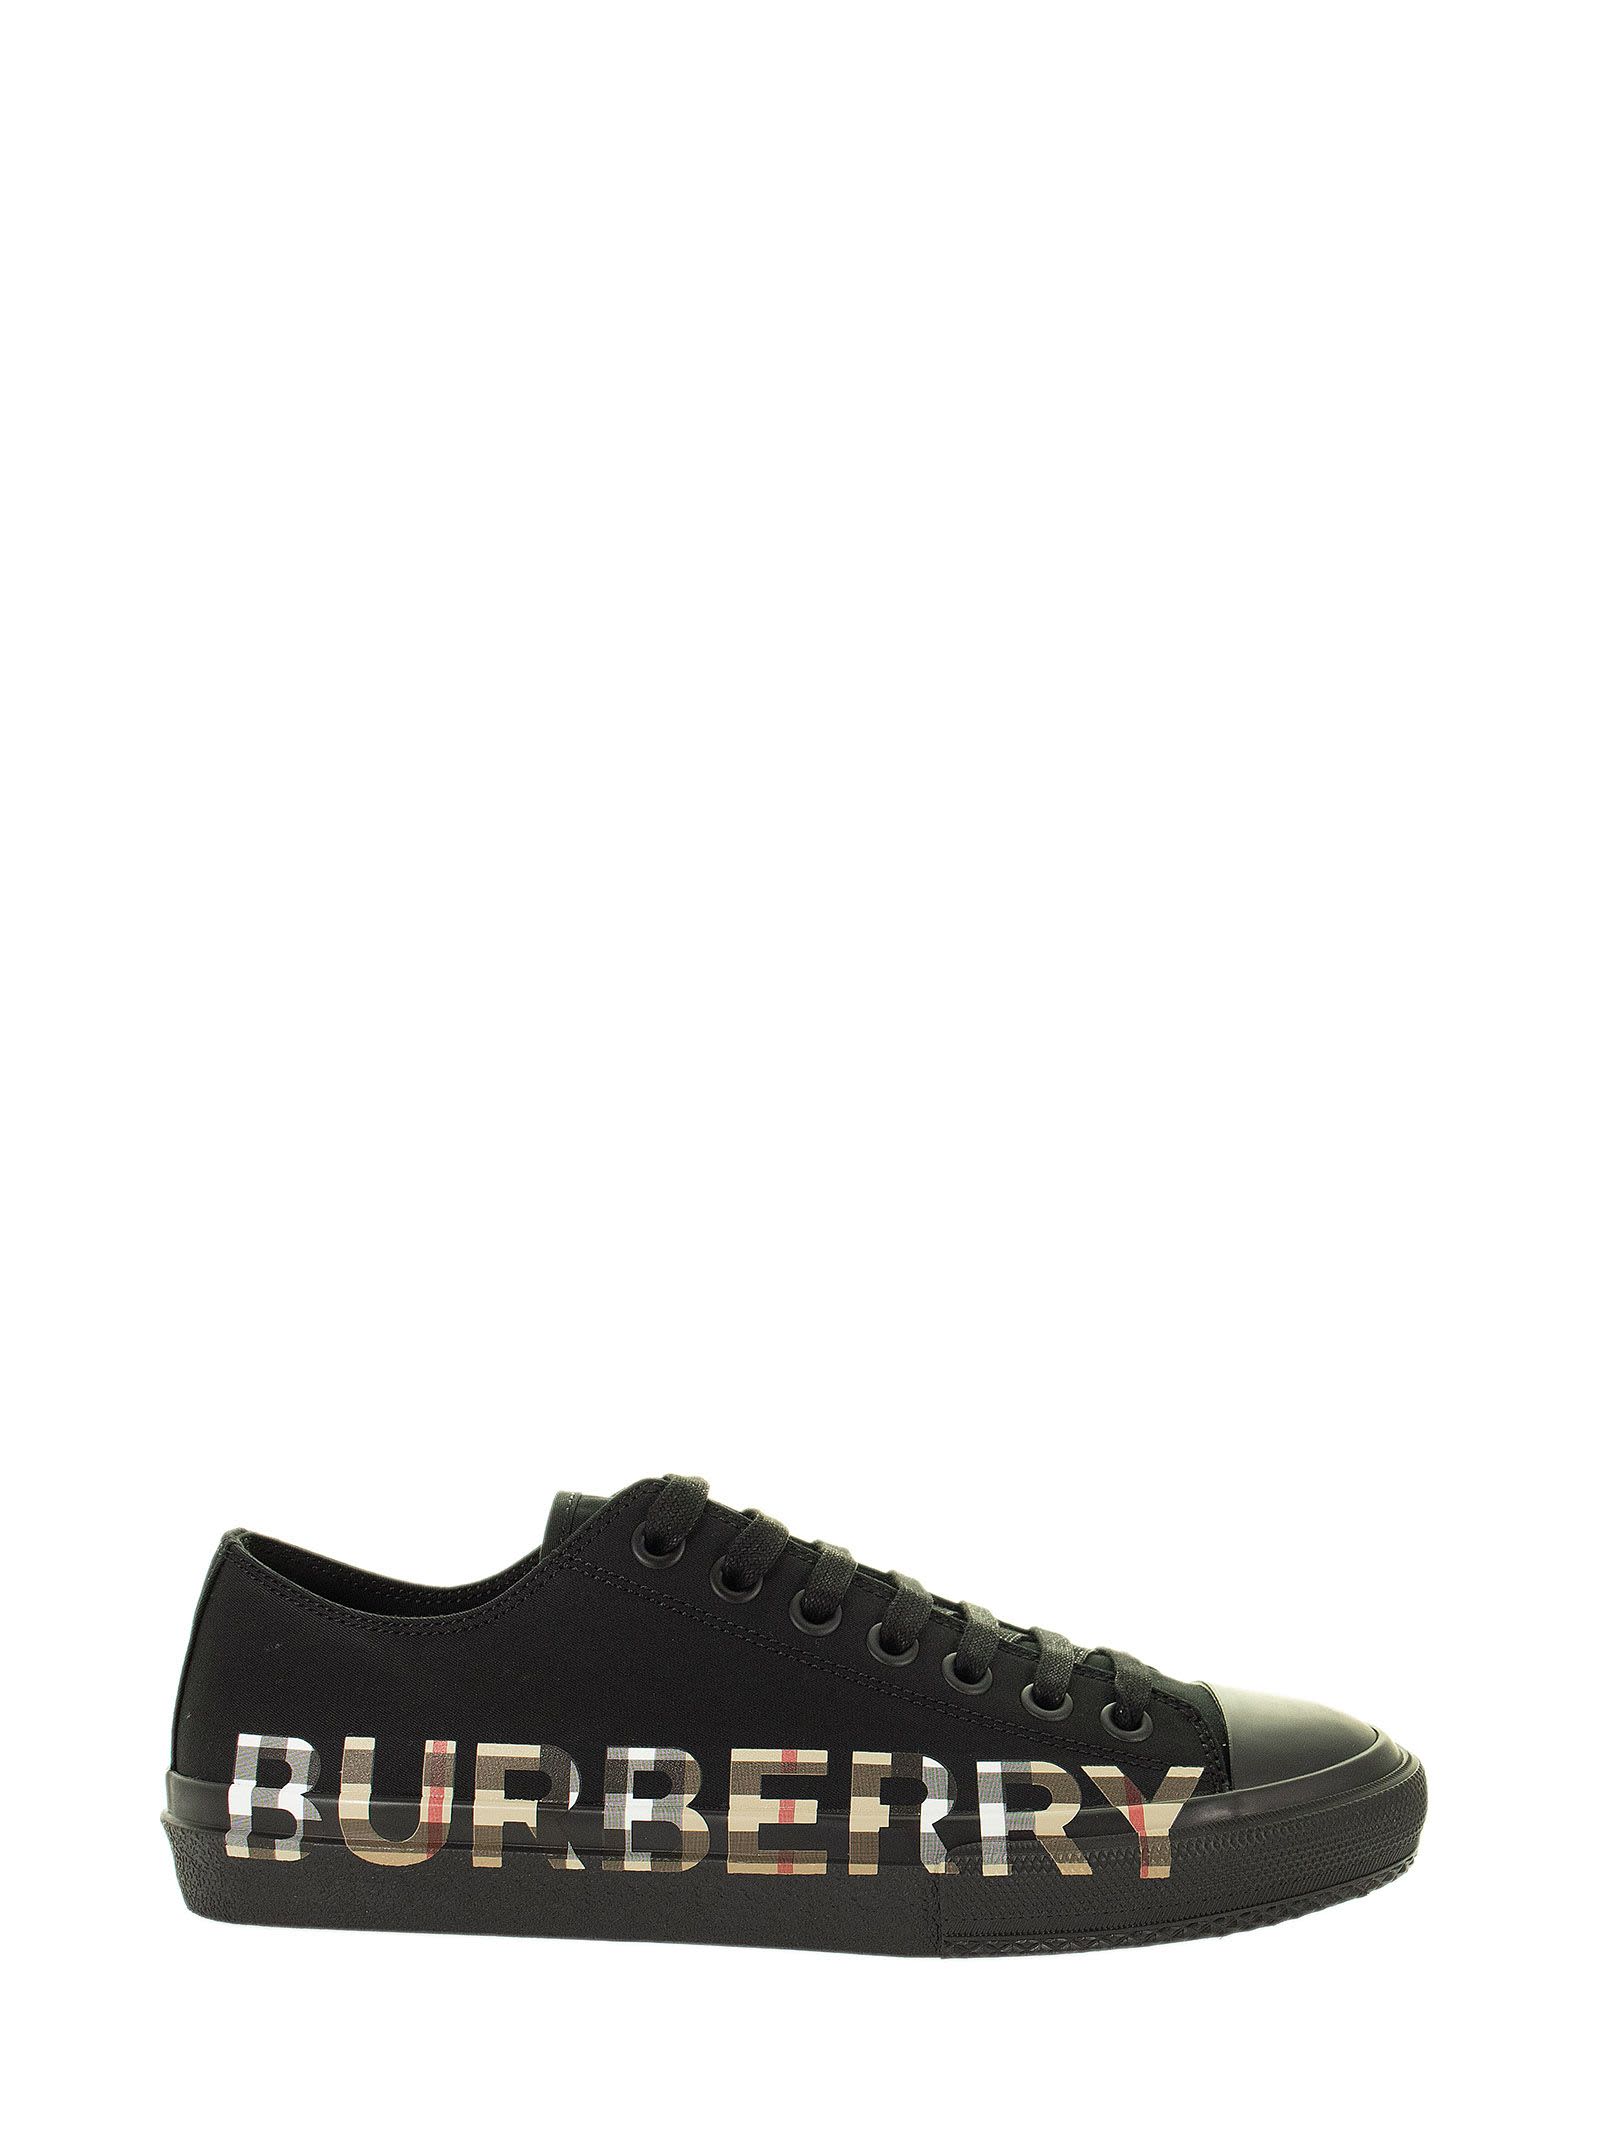 Burberry Larkhall M - Cotton Gabardine Trainer With Logo And Vintage Check Pattern